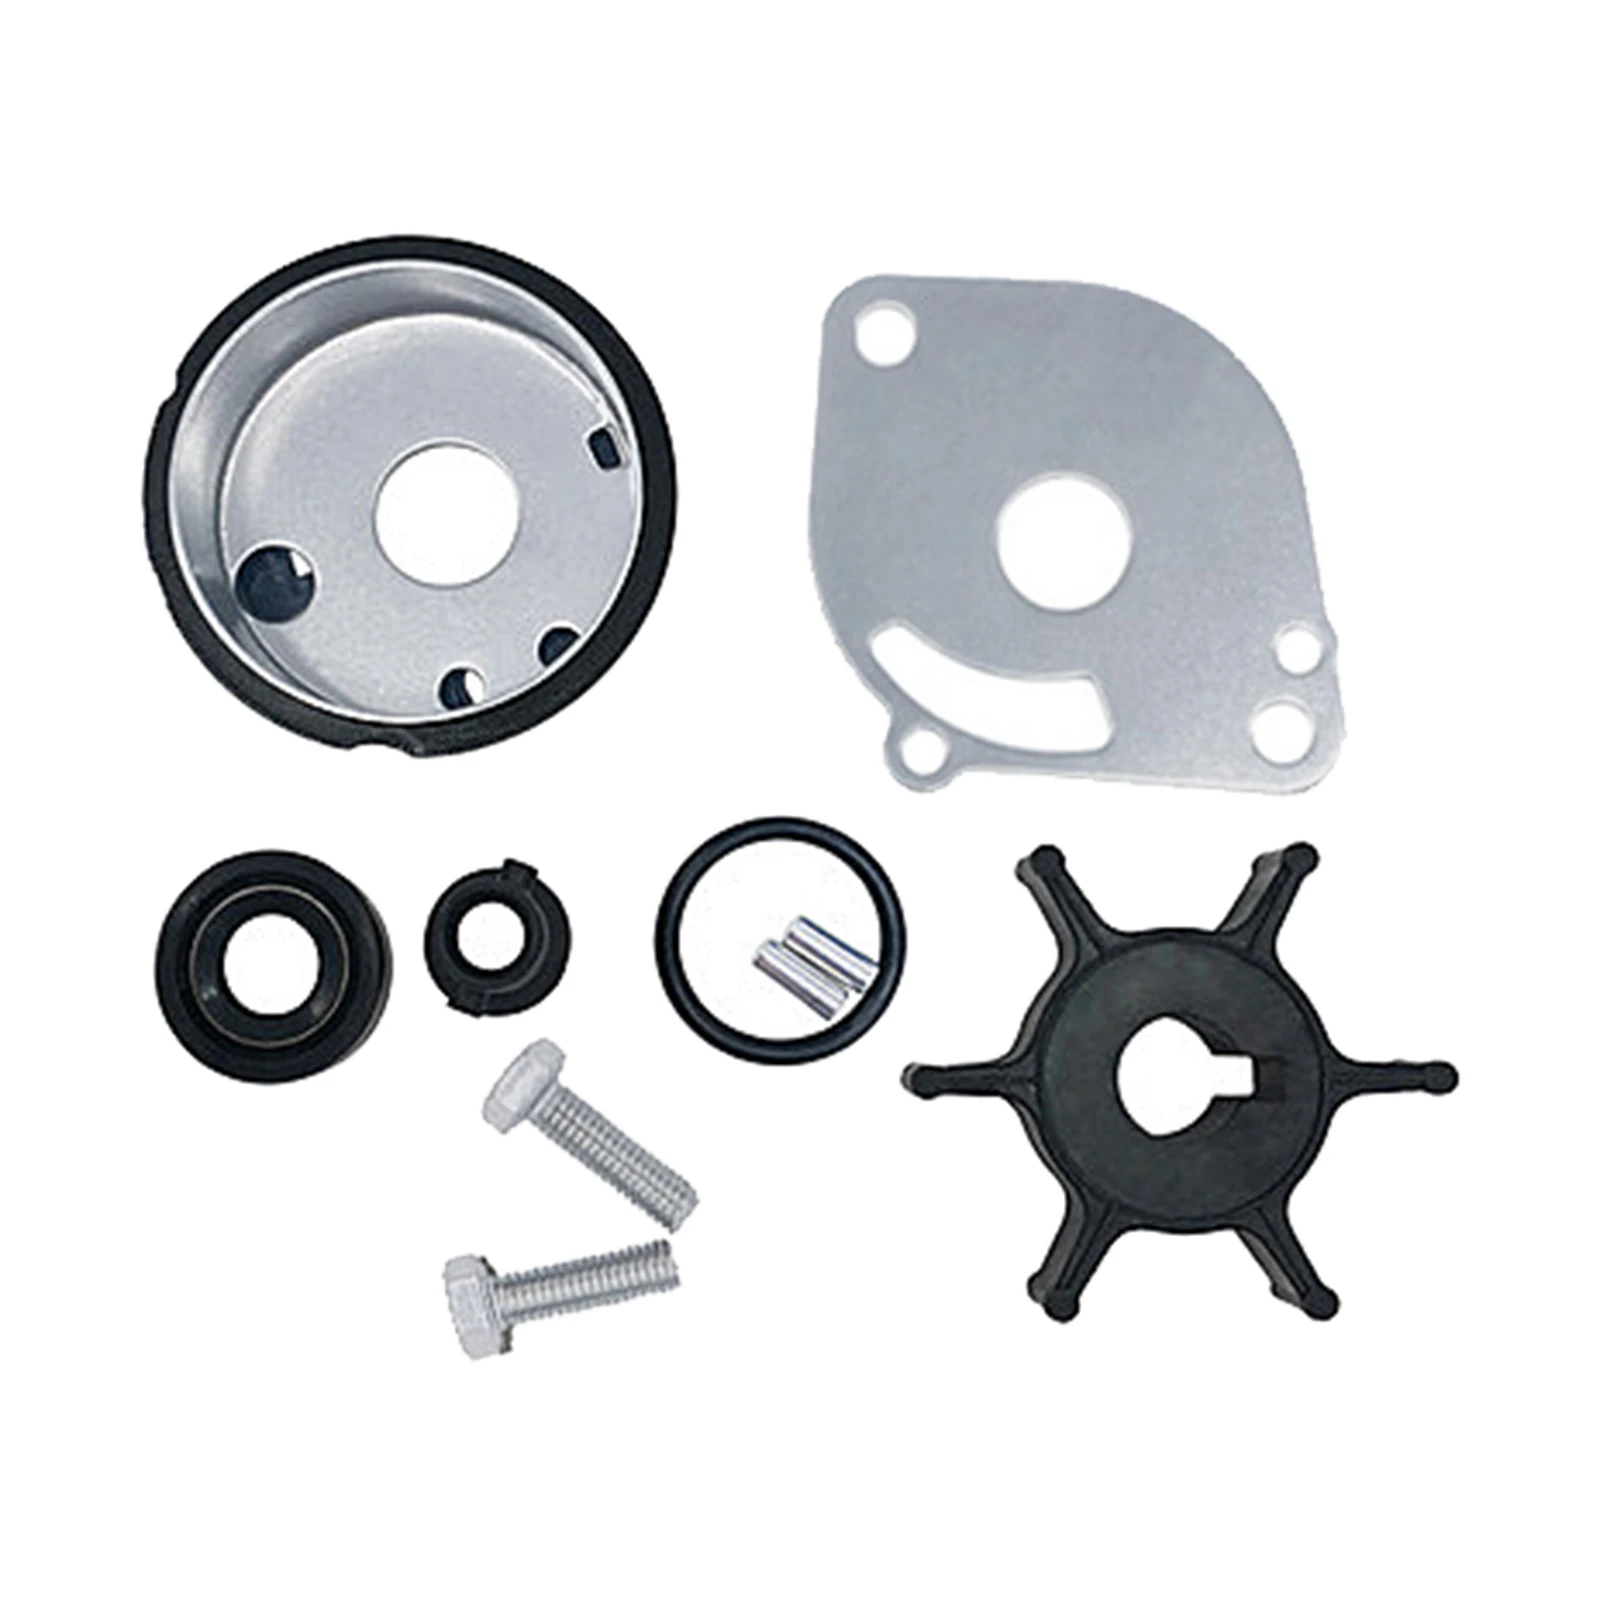 

Water Pump Impeller Repair Kit for YAMAHA 2HP 2 STROKE1988-2009 6A1-W0078 6A1-W0078-02 Replace New